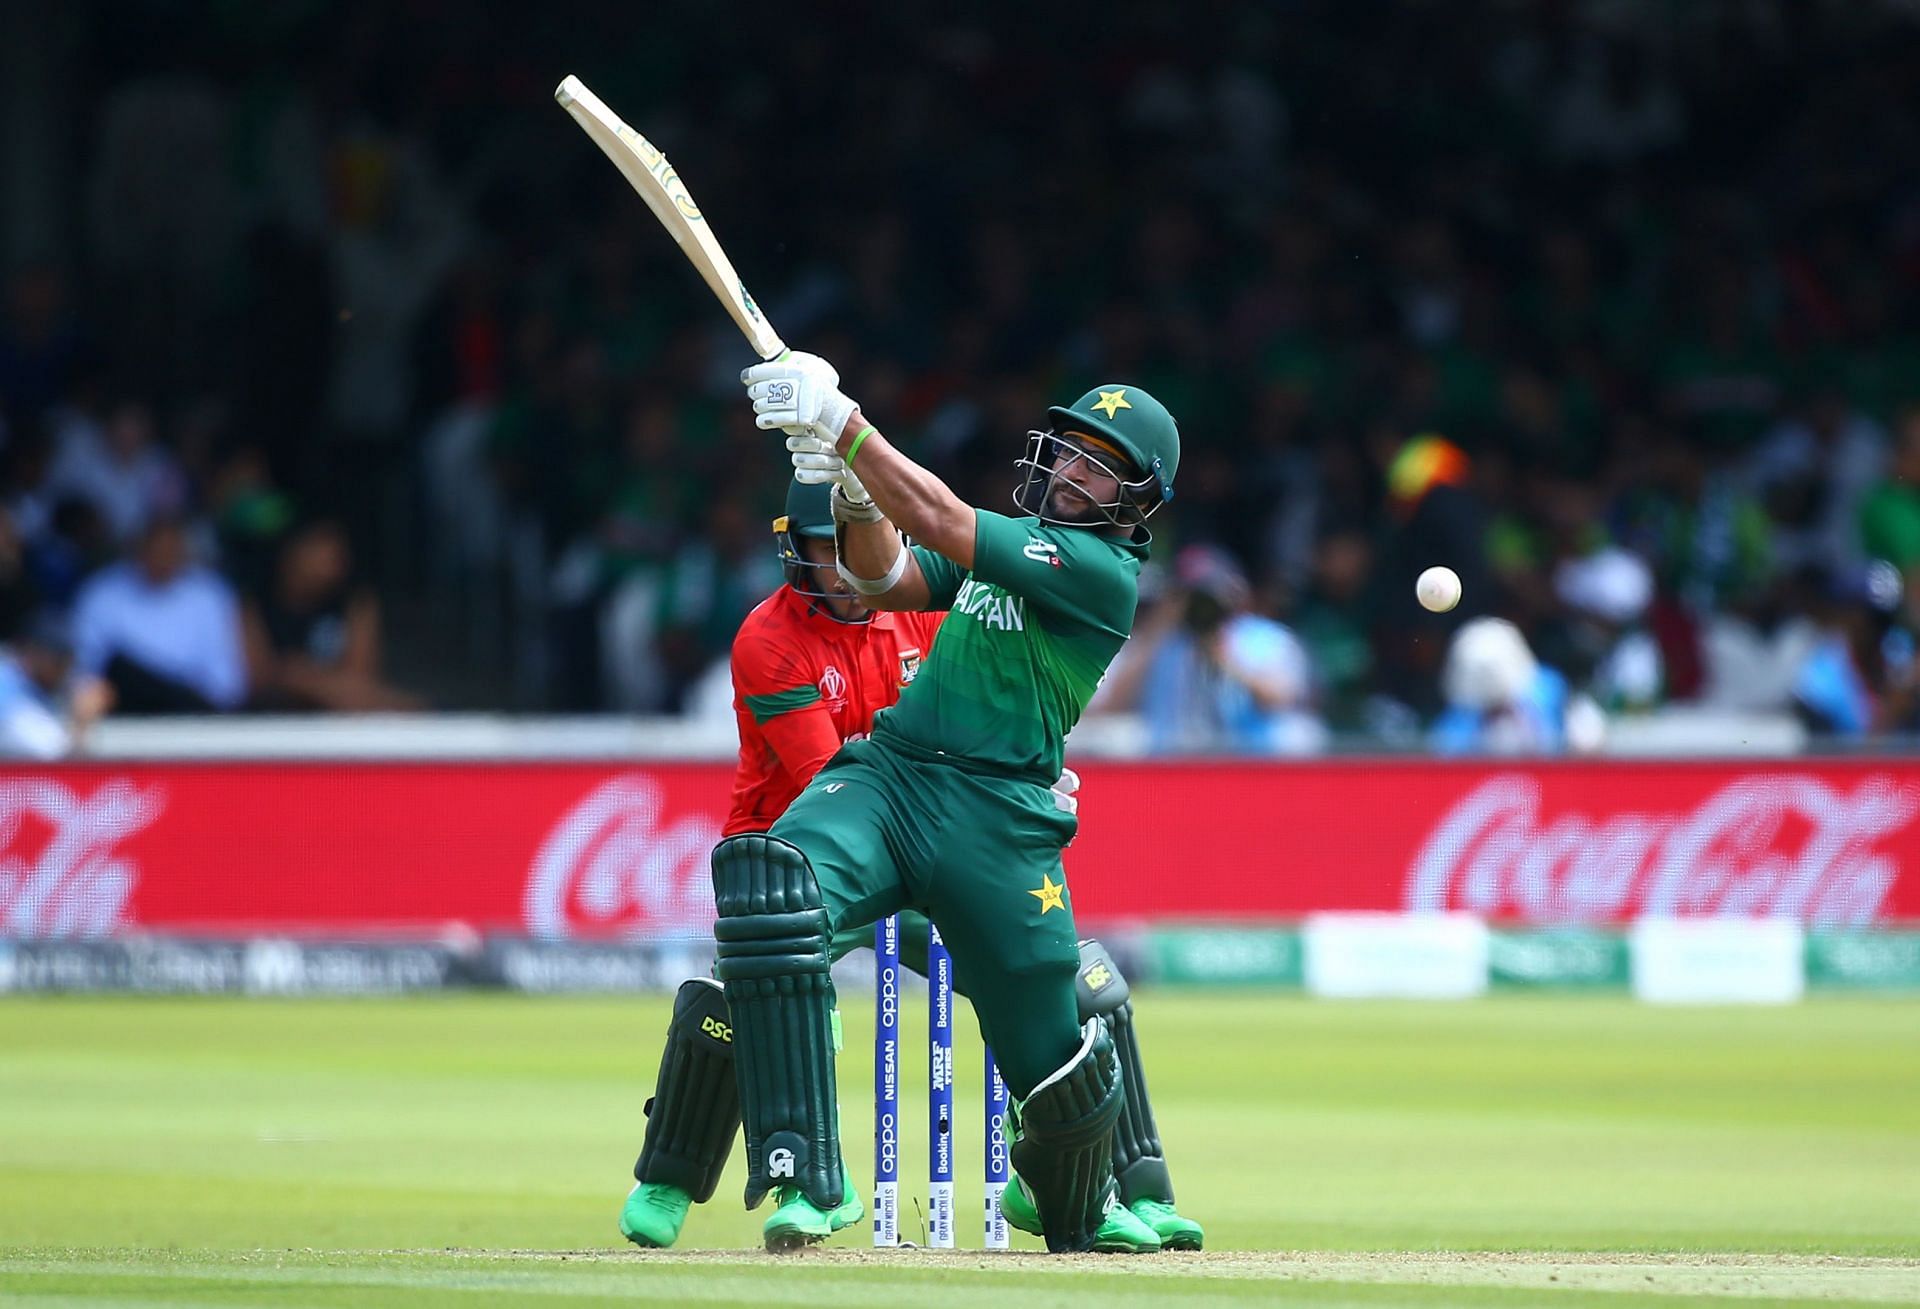 Imam-ul-Haq was in great touch during the ICC Cricket World Cup Super League series against Australia (Image courtesy: Getty Images)